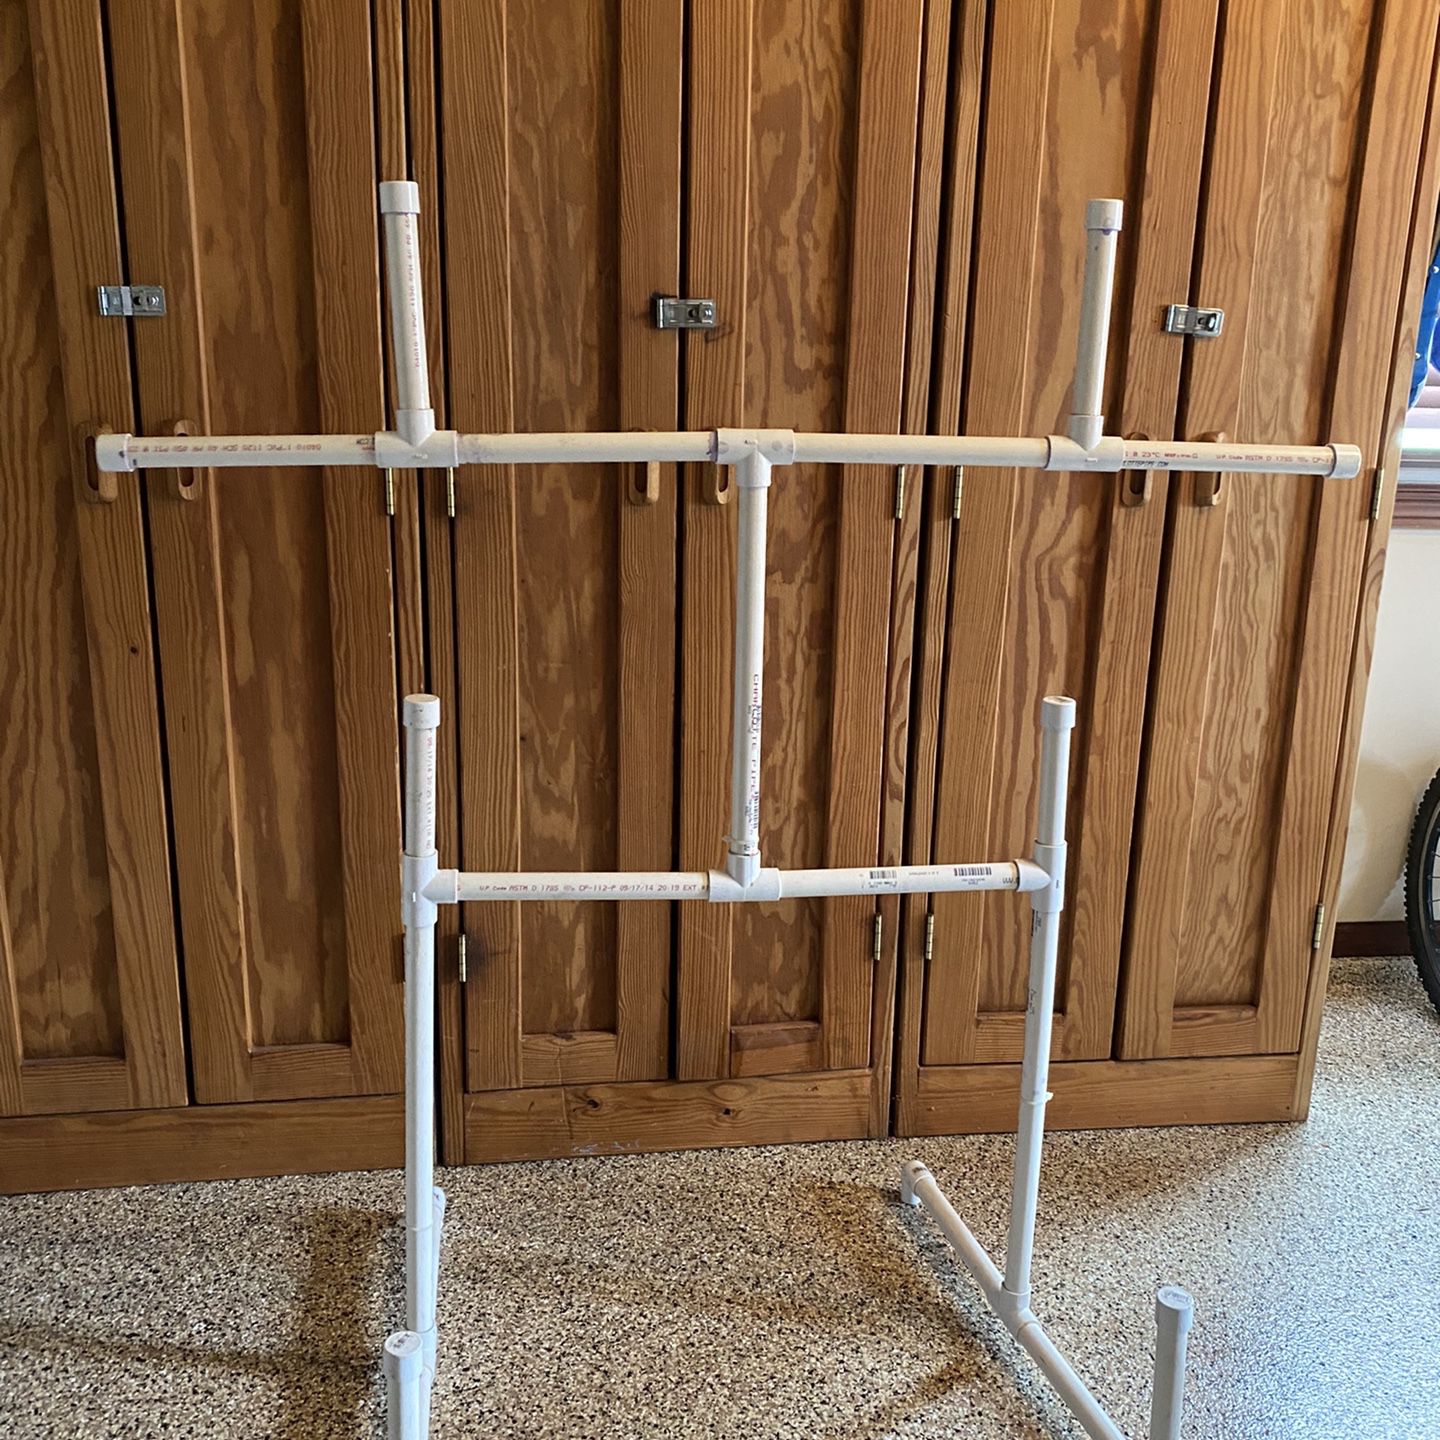 Hockey Equipment Drying Rack for Sale in Blackstone, MA - OfferUp